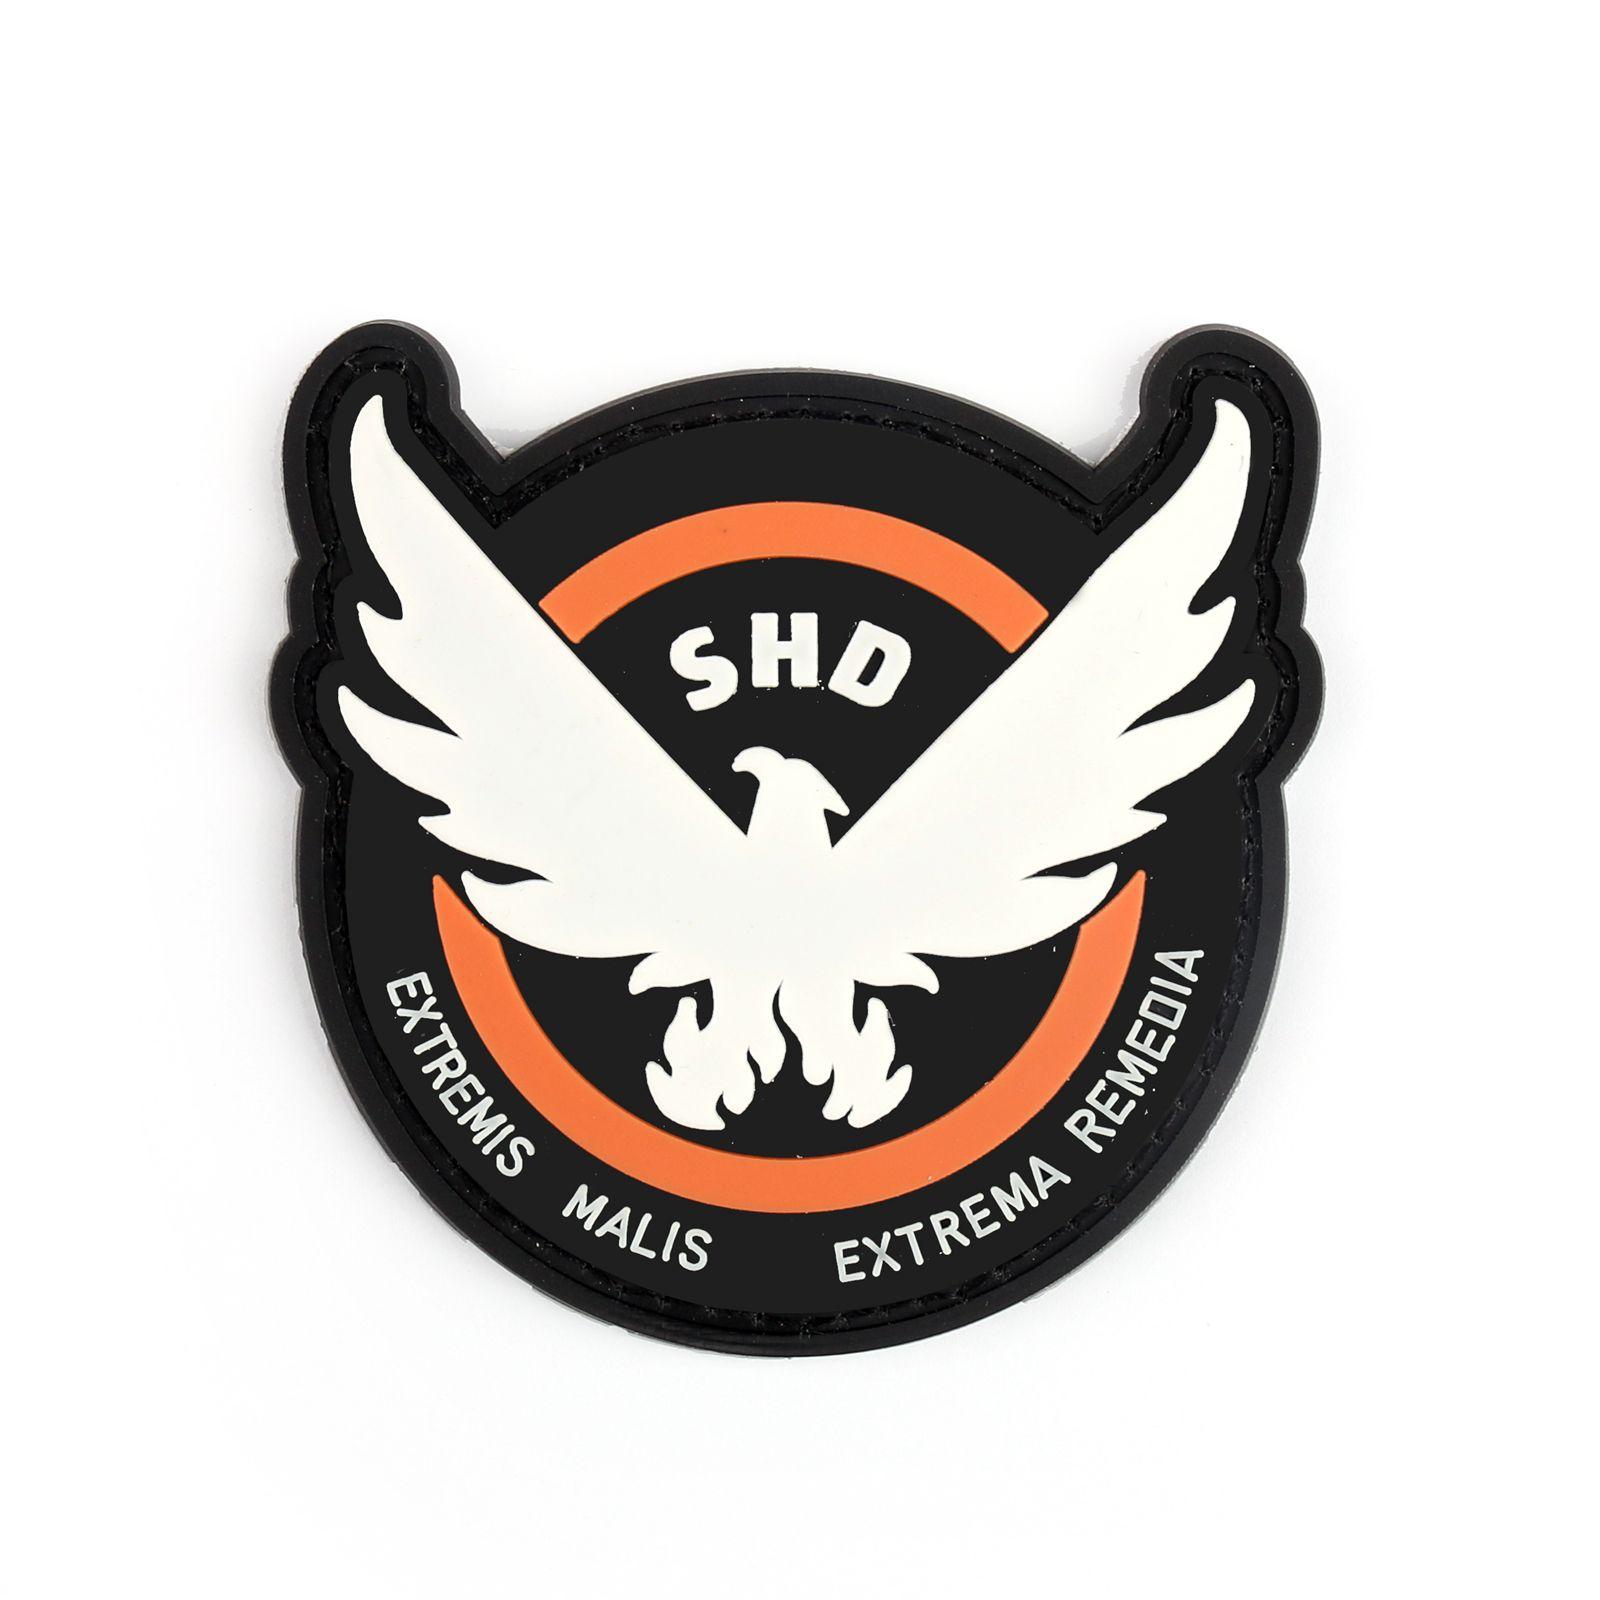 The Division Shd Logo - 9CM Tom Clancy's The Division Agent SHD logo Hook Loop patch badge ...